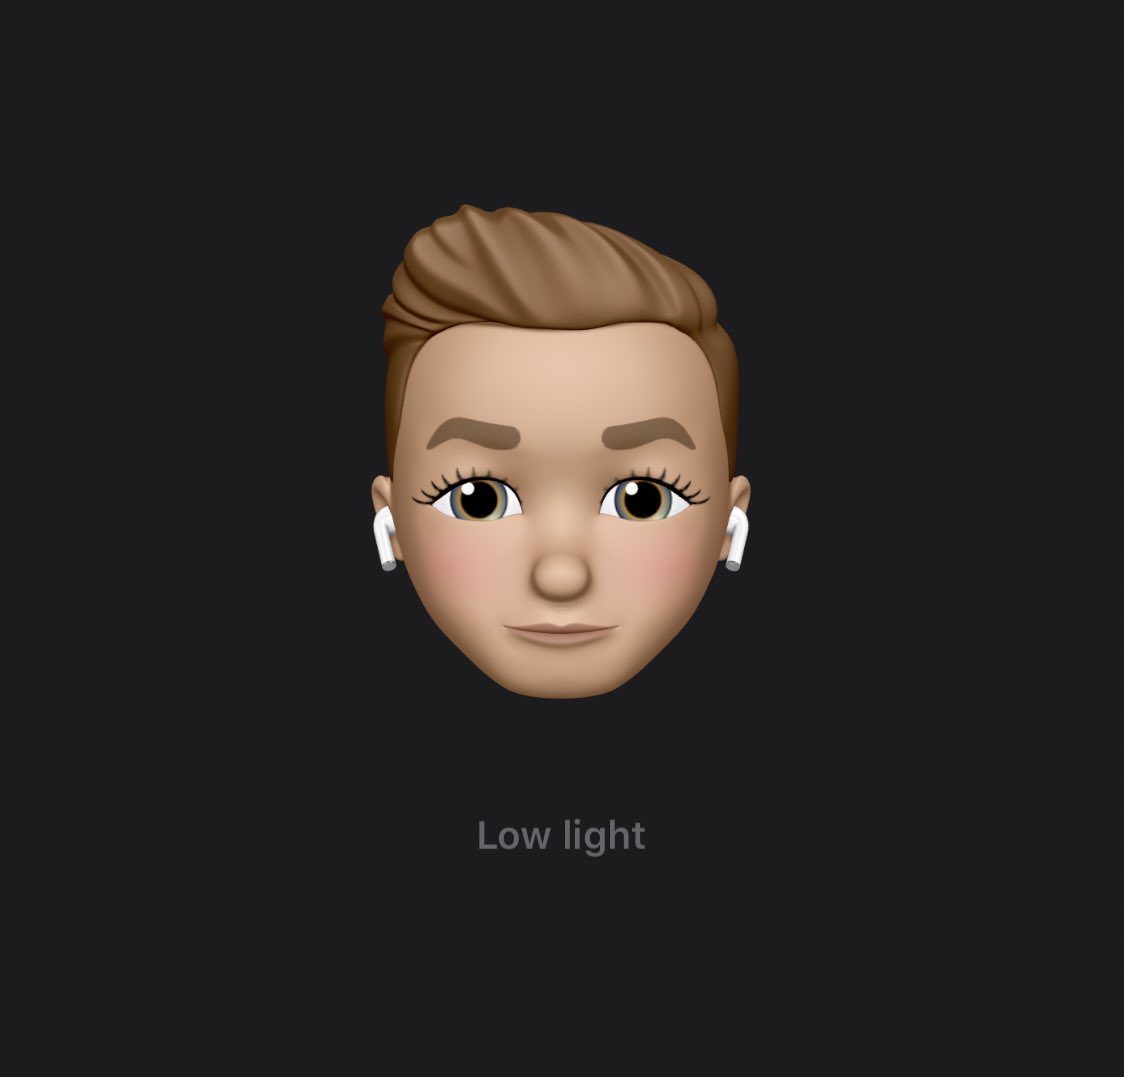 Ty is obsessed with his eyelashes so here is his Animoji that I made of him  #myprettygirl 👀👁@twwebb25